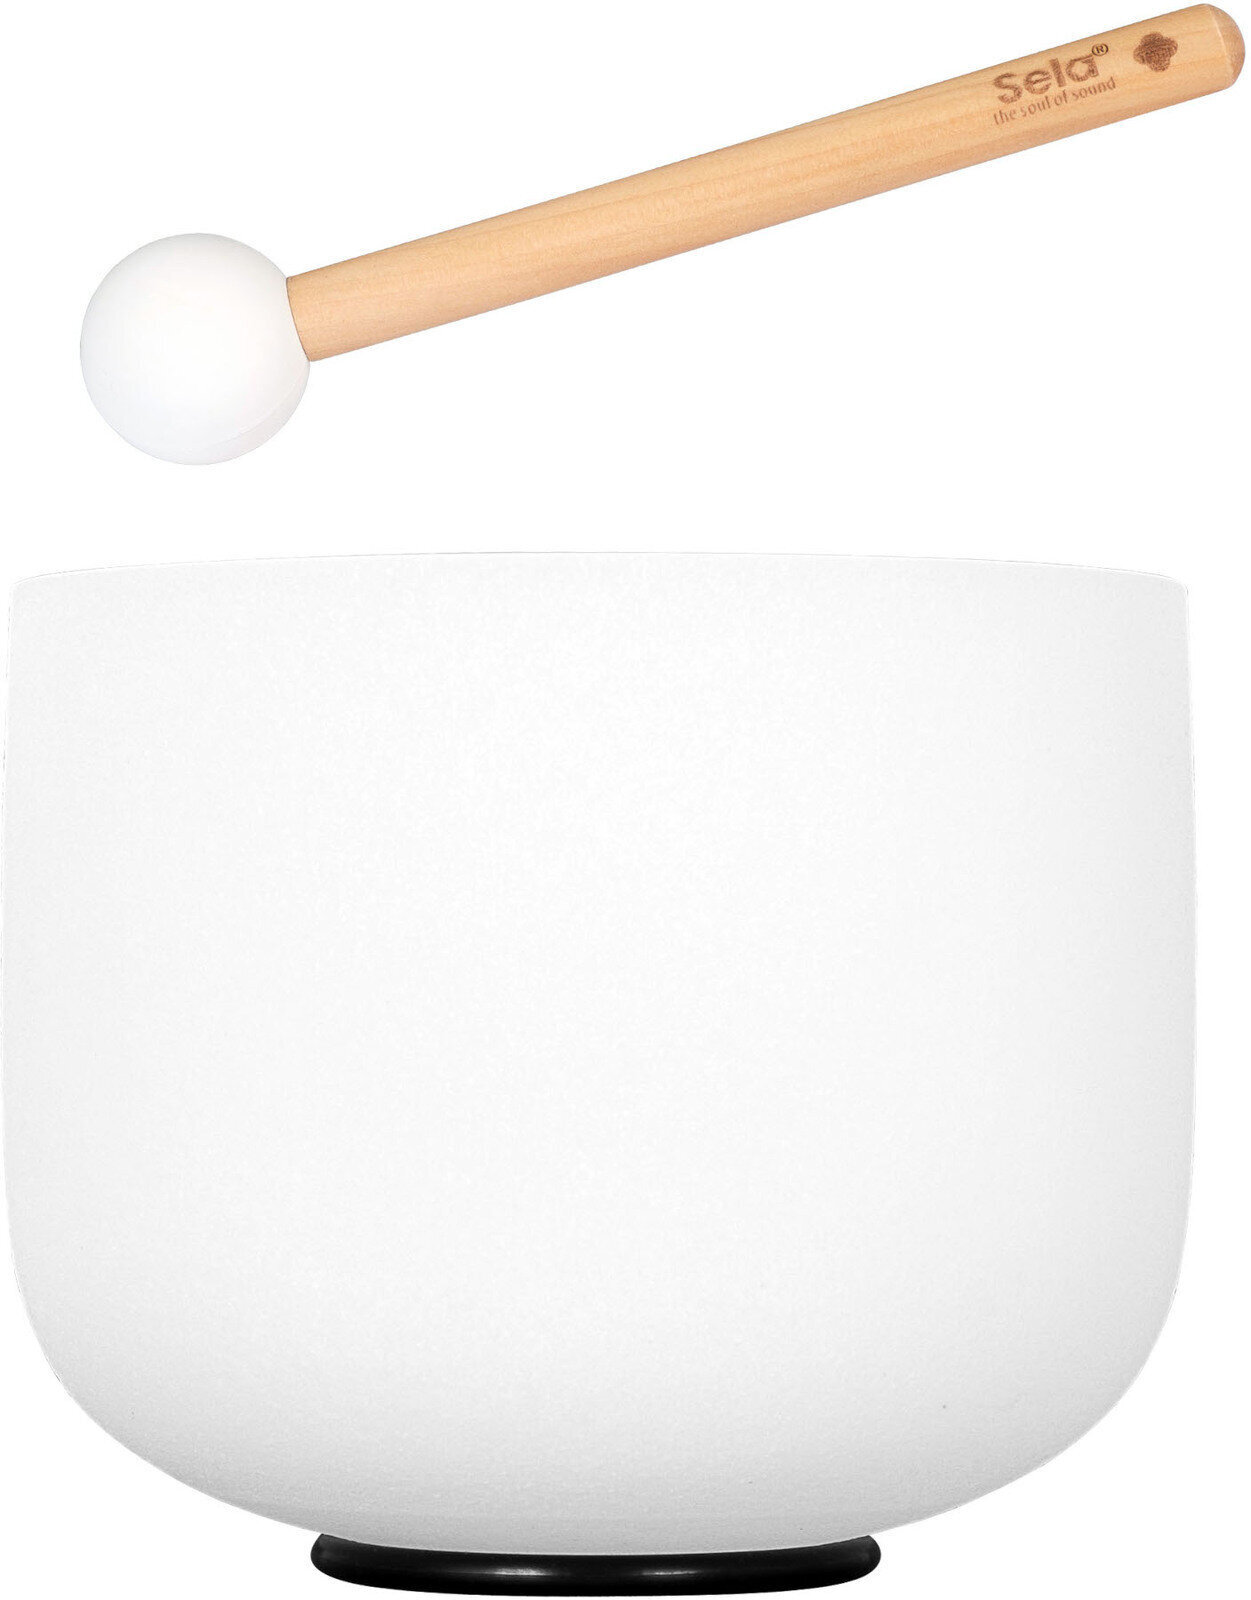 Percussion for music therapy Sela 8" Crystal Singing Bowl Frosted 432 Hz F incl. 1 Wood Mallet